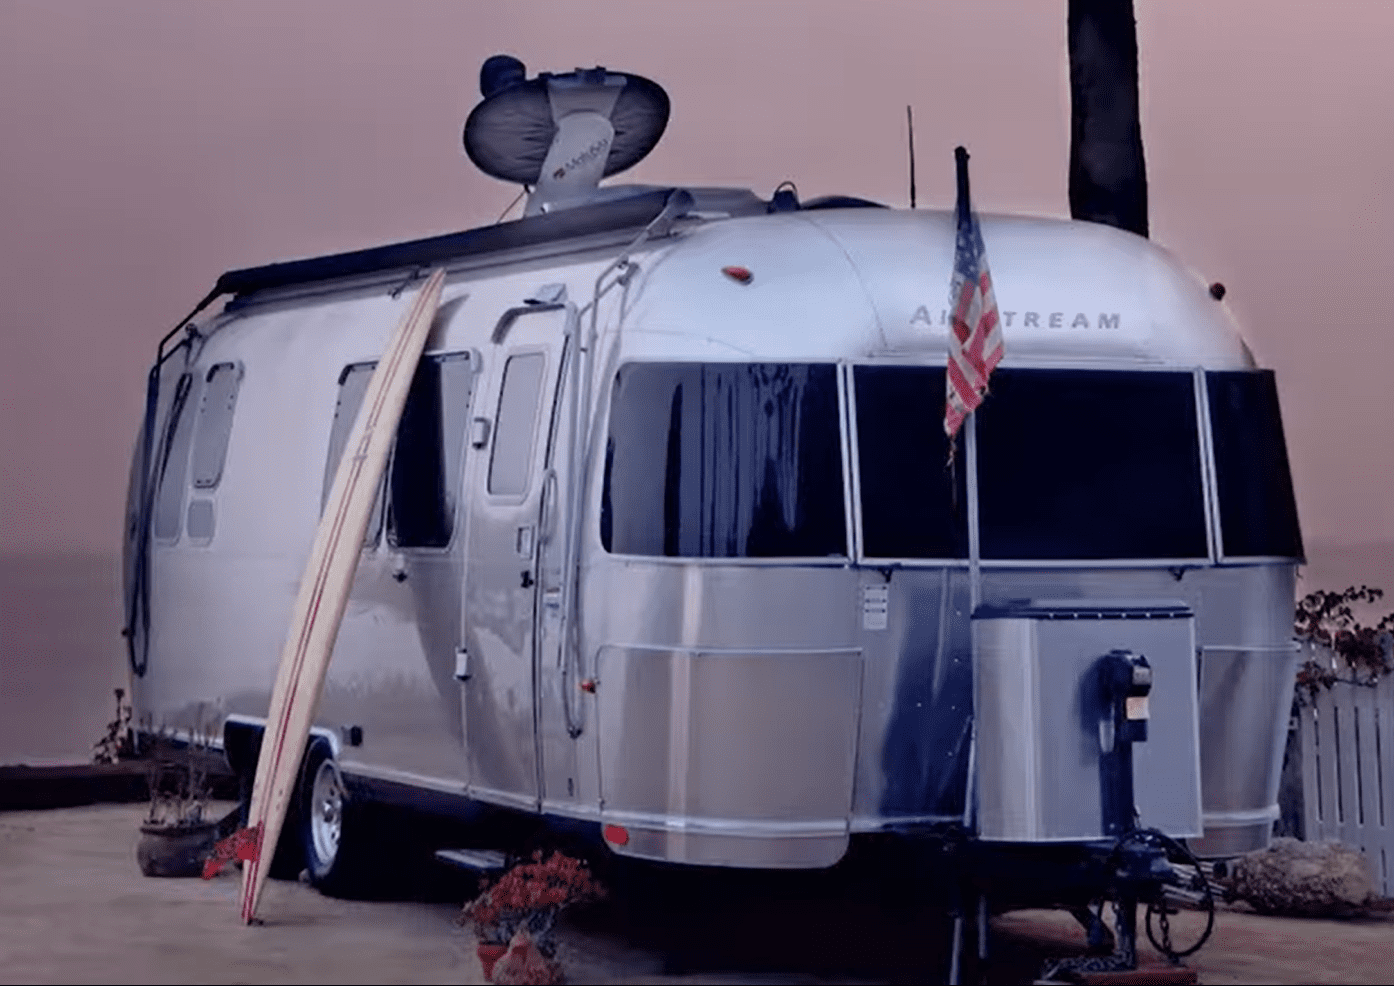 An Airstream trailer. | Source: youtube.com/Famous Entertainment